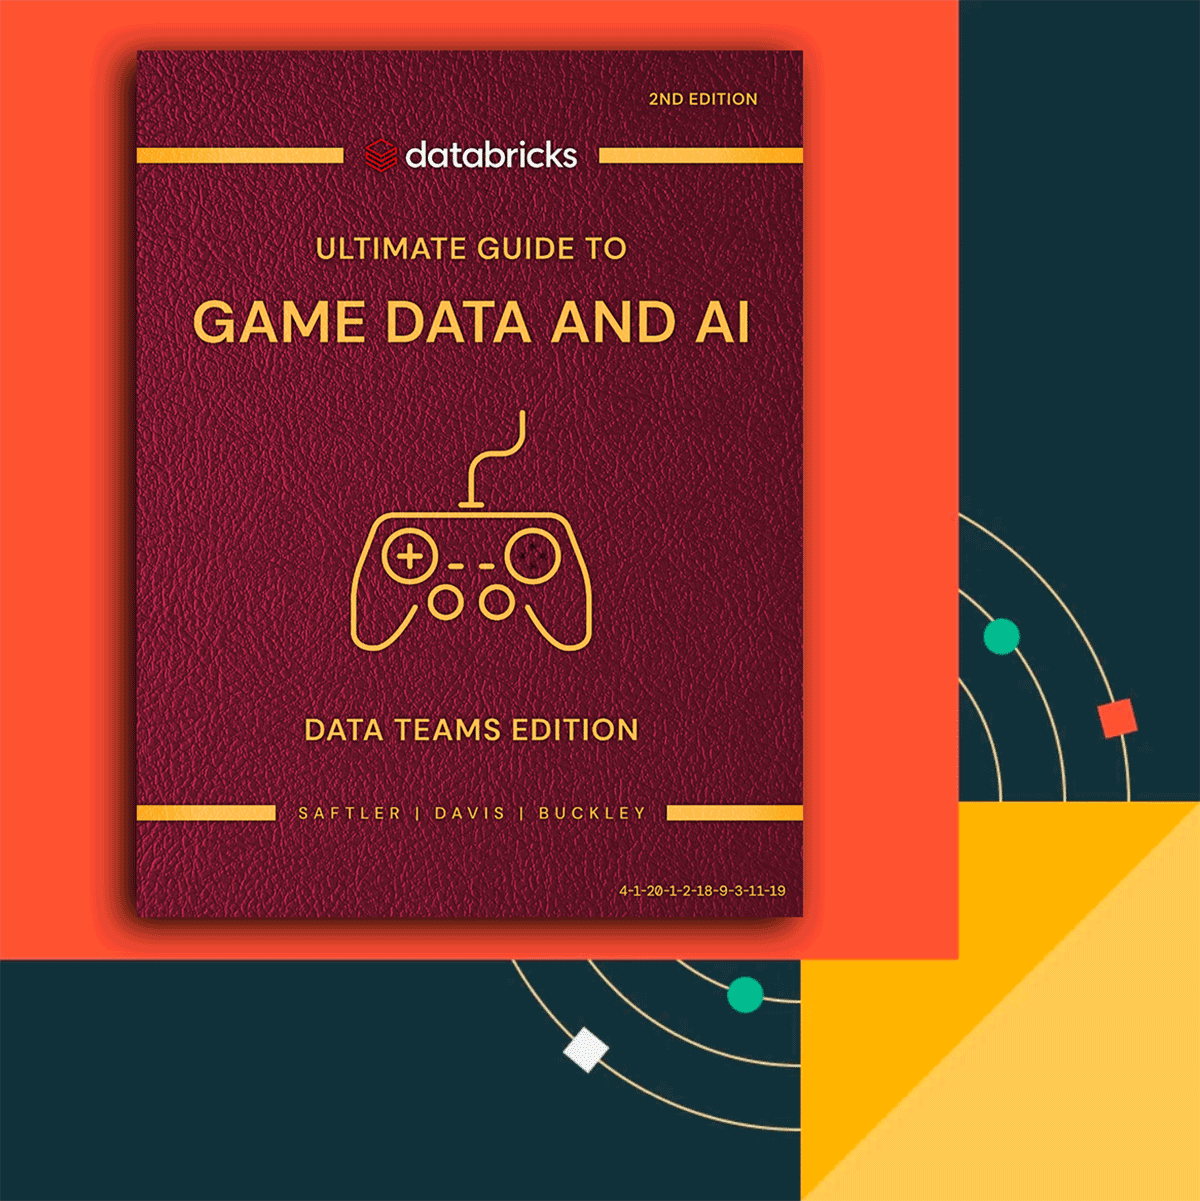 Ultimate Guide to Game Data and AI